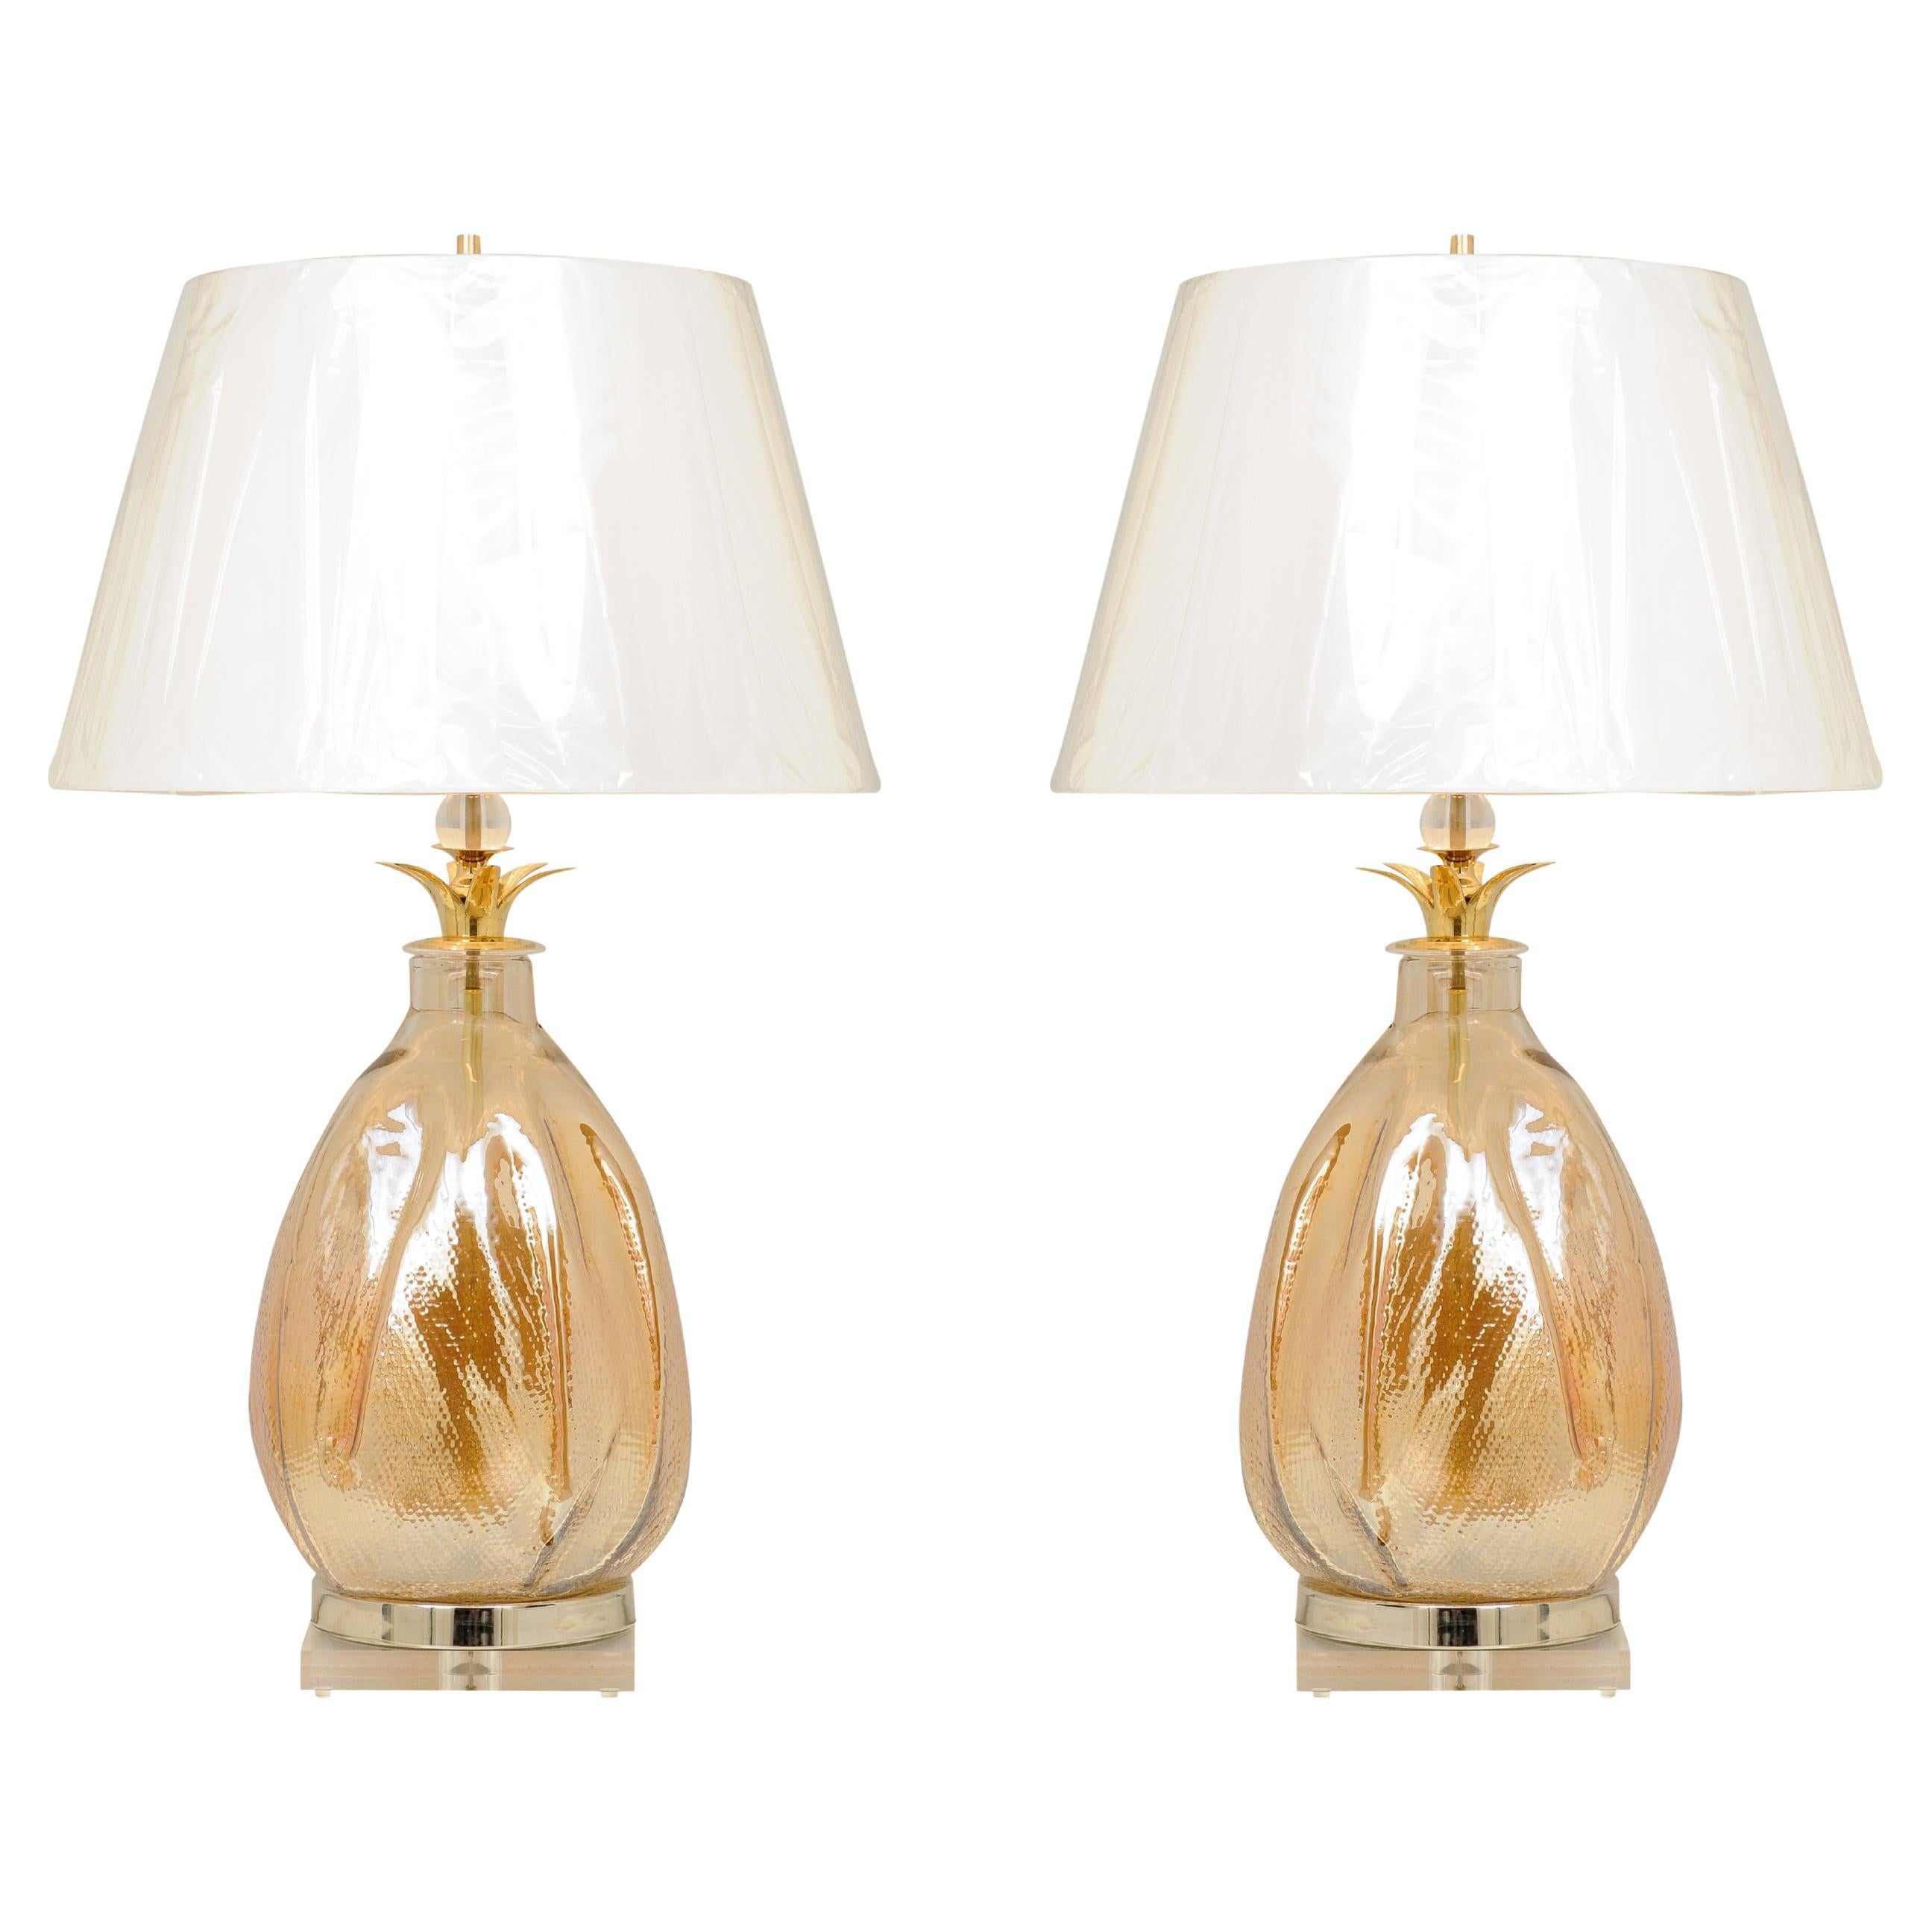 Extraordinary Pair of Oversize Iridescent Pearl Murano Vessels as Custom Lamps For Sale